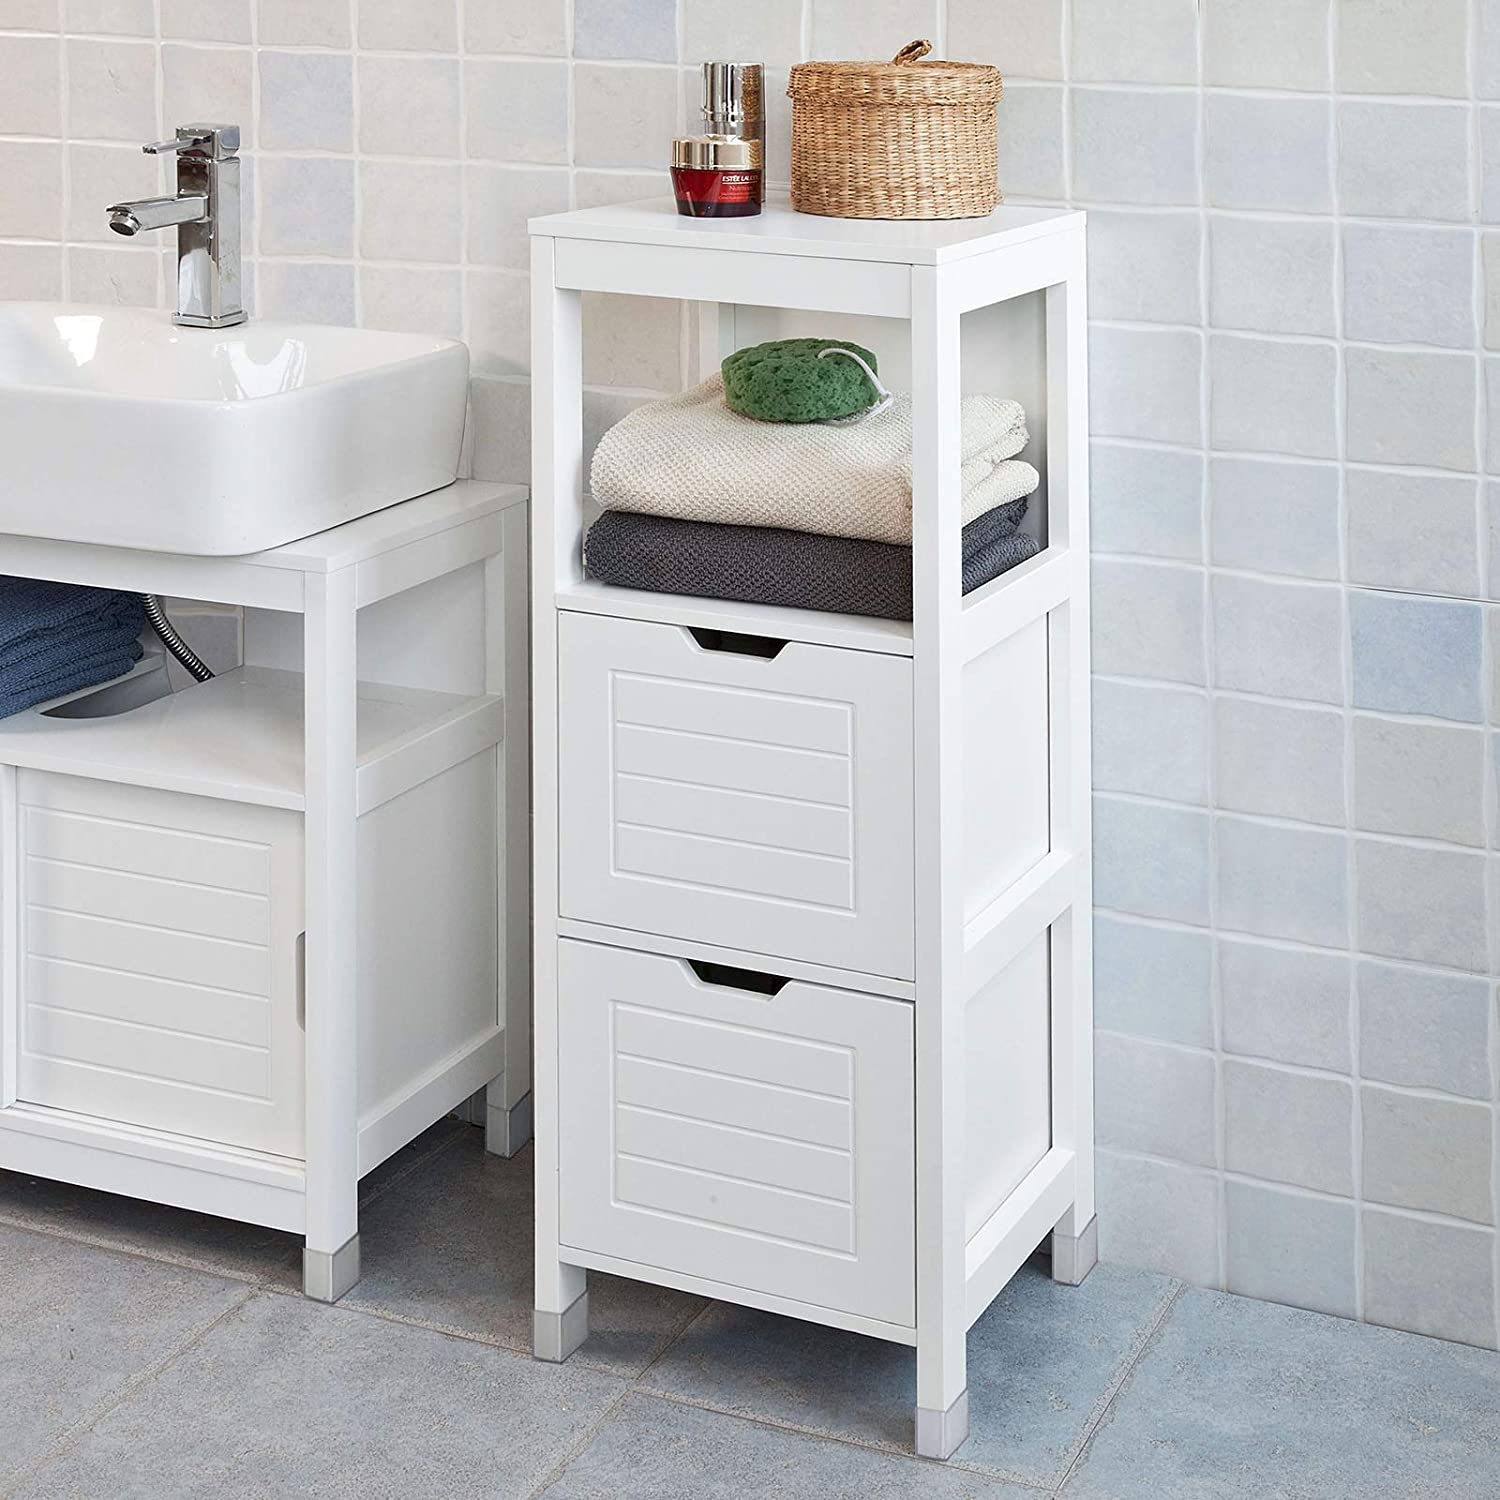 Freestanding Cabinet with 2 Drawers and Shelf for Bathroom